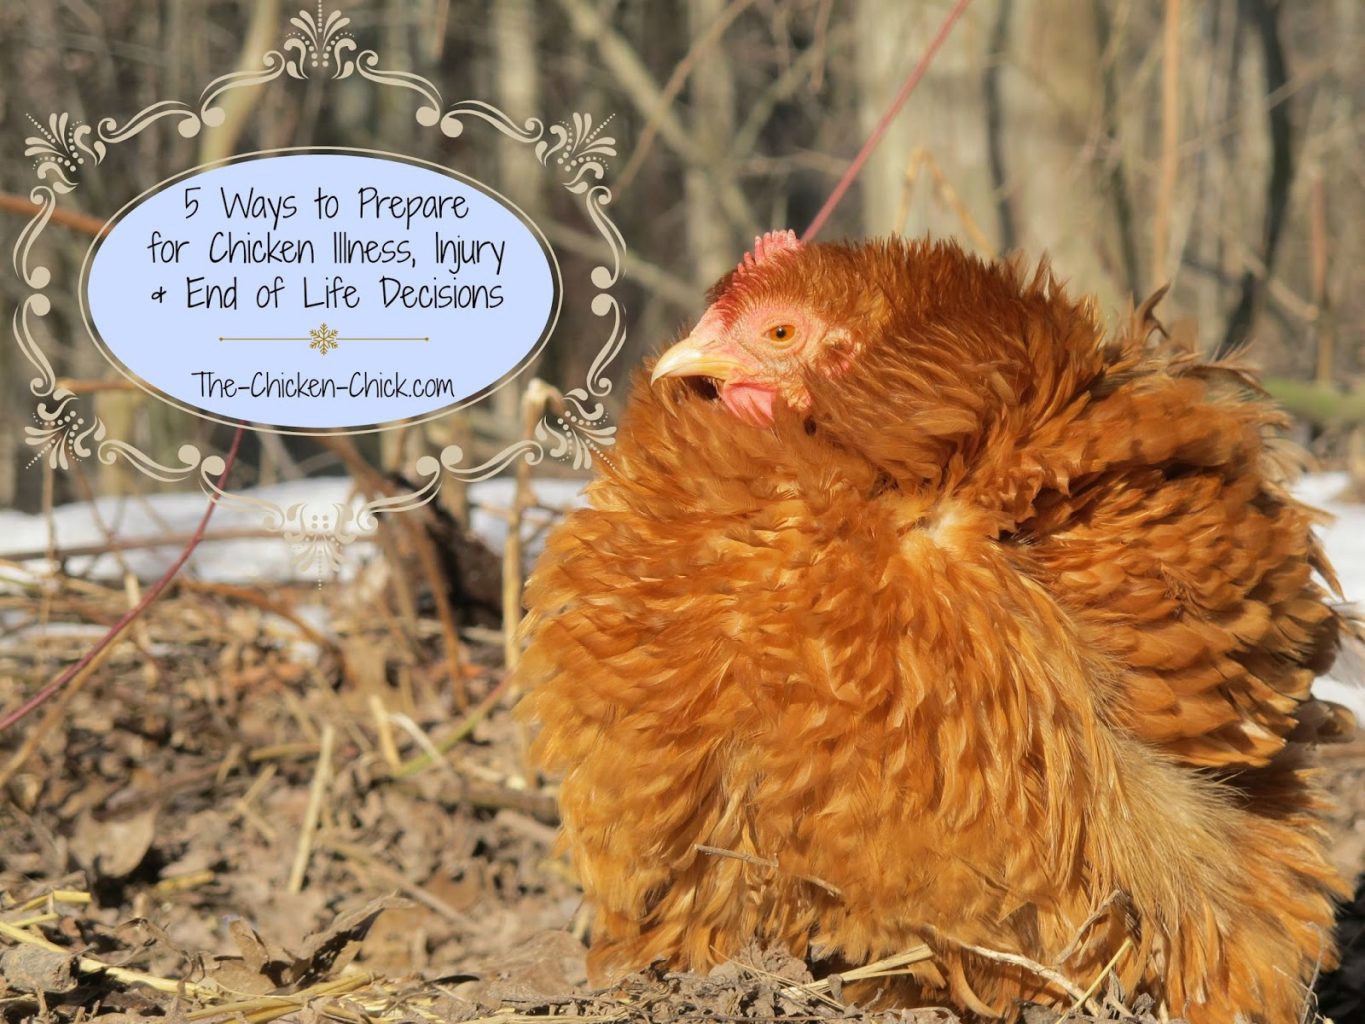 Most of us spend a great deal of time preparing for the arrival of our first chickens, but few of us give much thought to how we would handle serious injuries, illnesses and end-of-life decisions until they are upon us. My recent experience with a dying chicken made me realize that I could have been better prepared to handle certain aspects of her fatal illness, which make an already difficult time, more stressful. My hope is that by sharing my experience that you will be prepared to face the toughest part of chicken-keeping when the time comes.